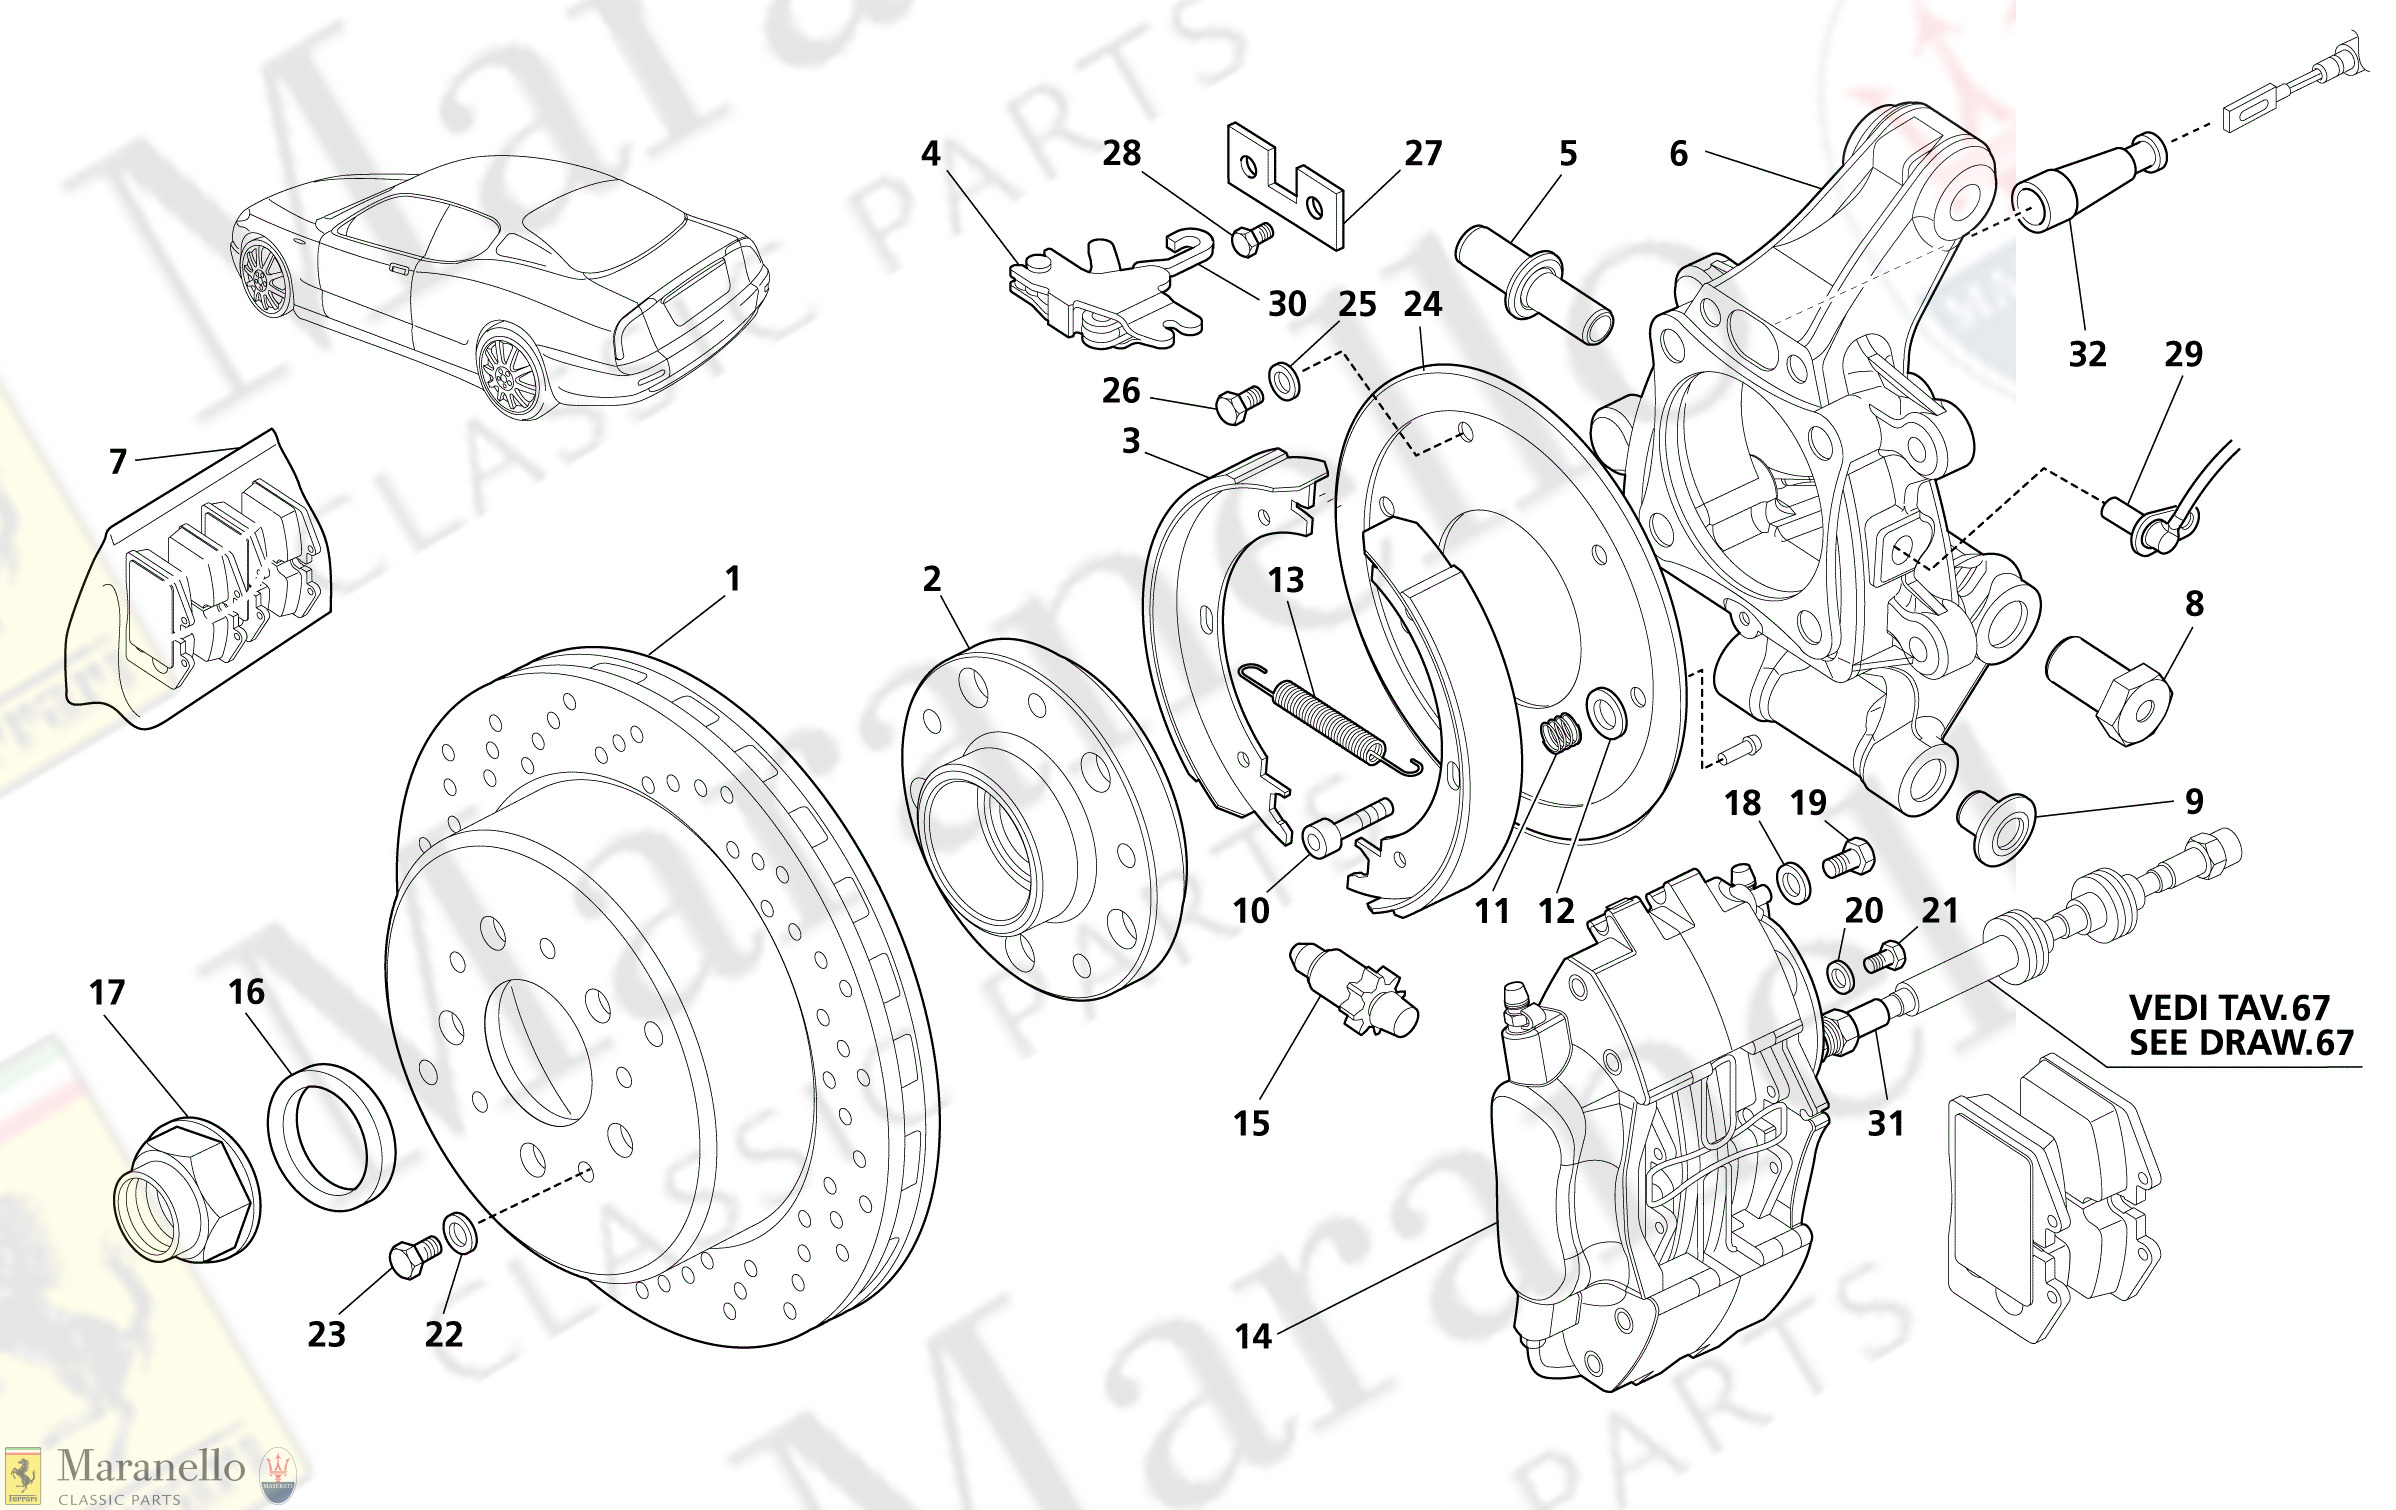 C 063 - Hubs, Rear Brakes With Abs